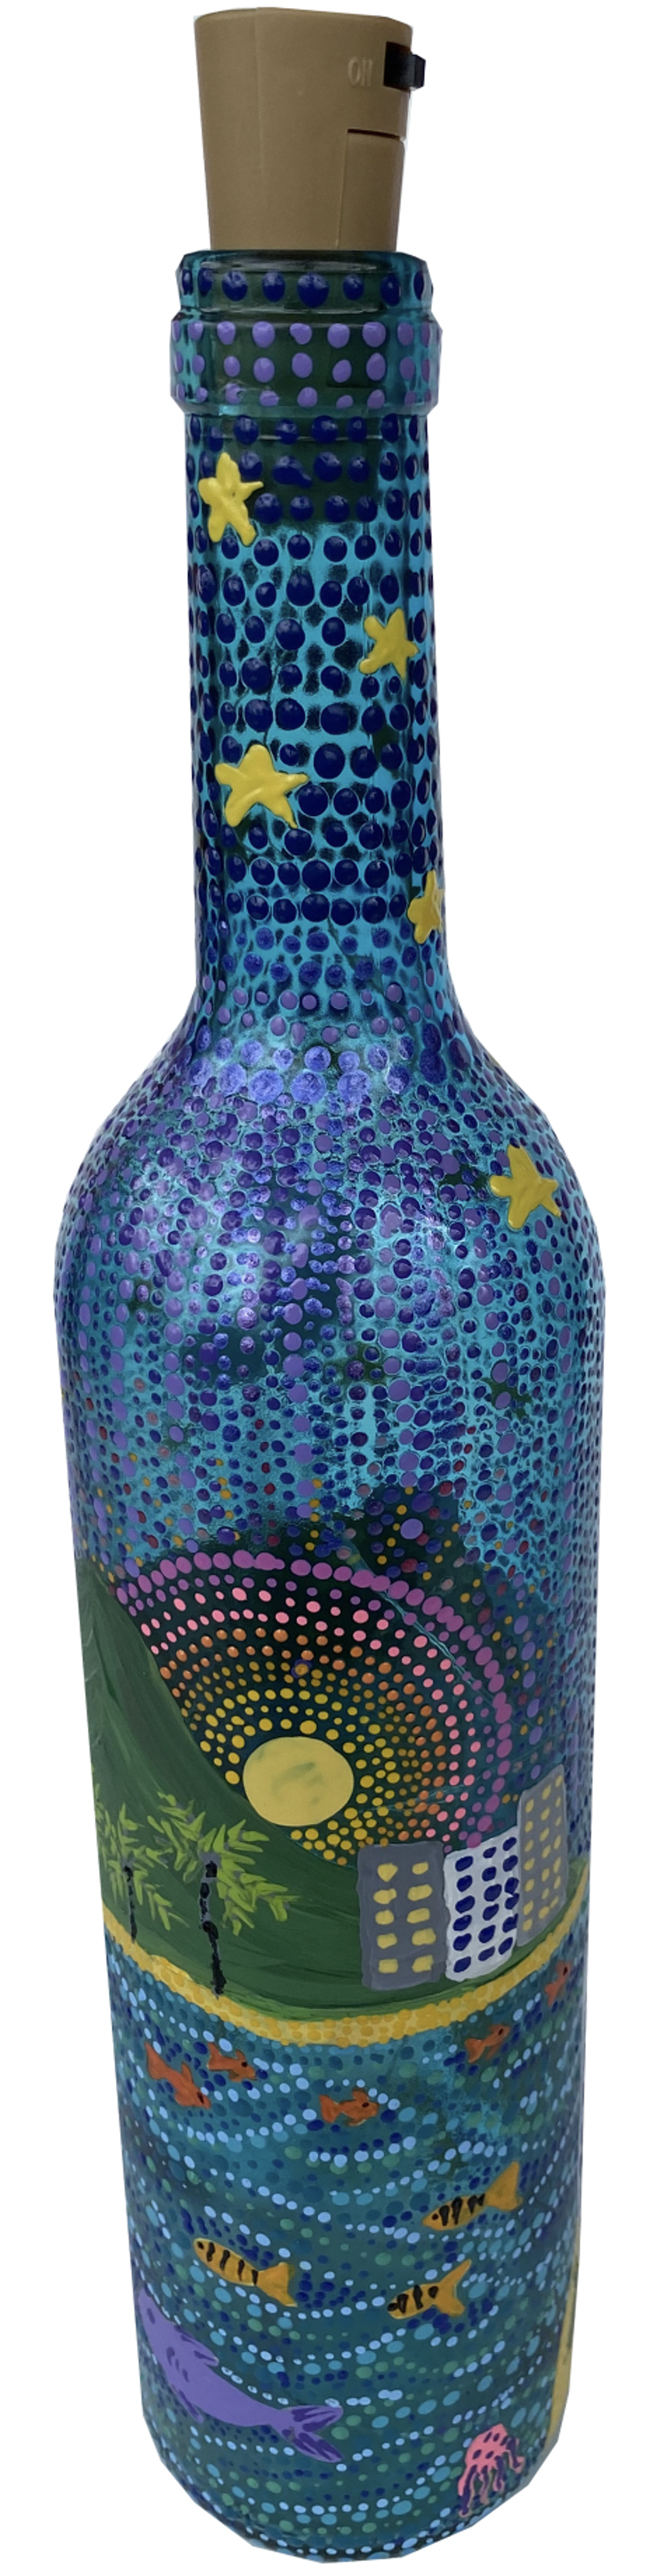 Lighted Glass Bottle - Sunrise by Carolyn Morgan Bauer